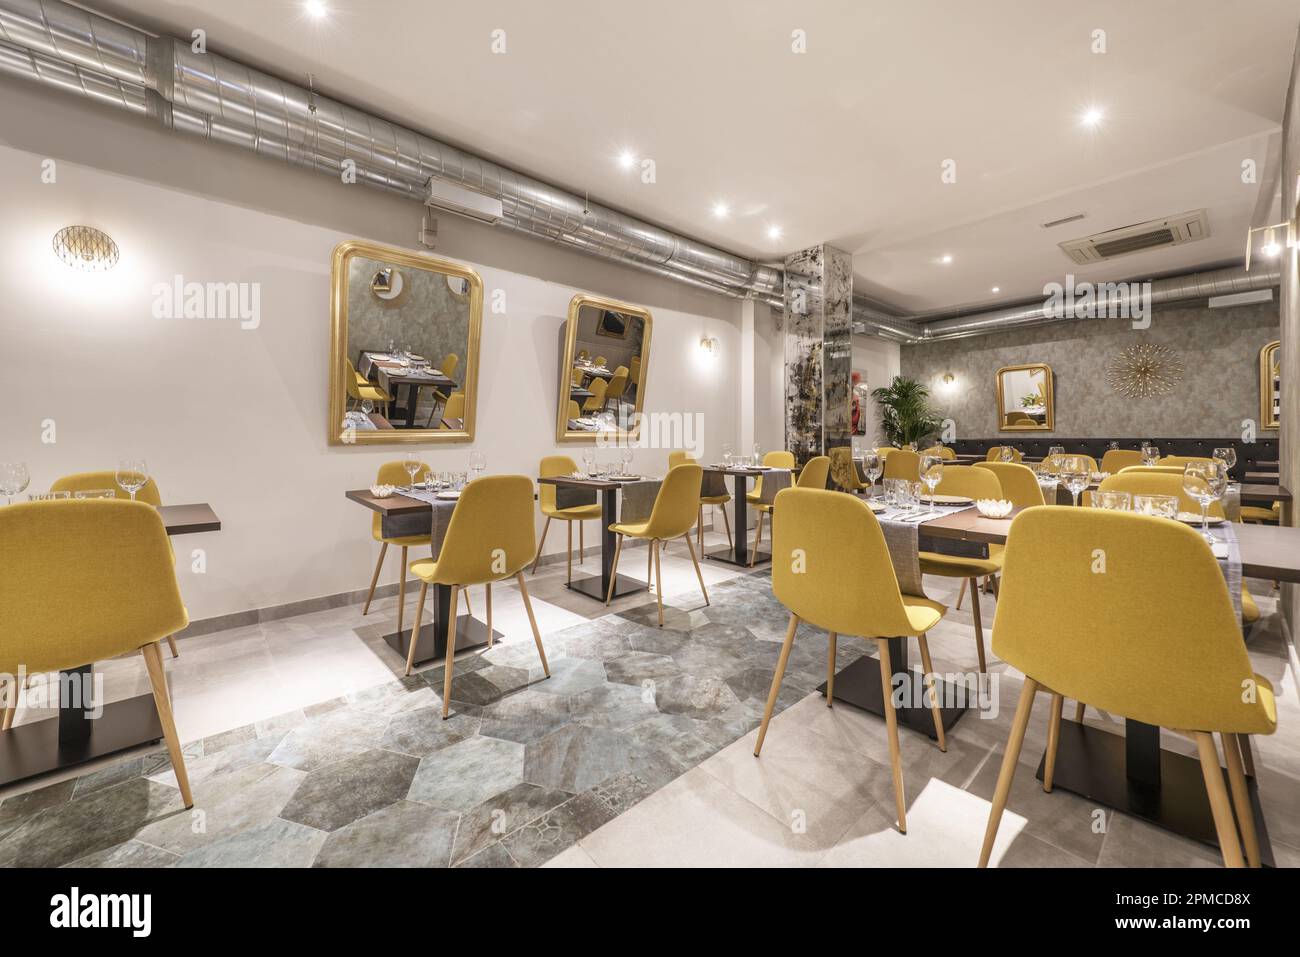 Dining room of a restaurant with assembled tables and chairs upholstered in yellow fabric and exposed air conditioning pipes Stock Photo